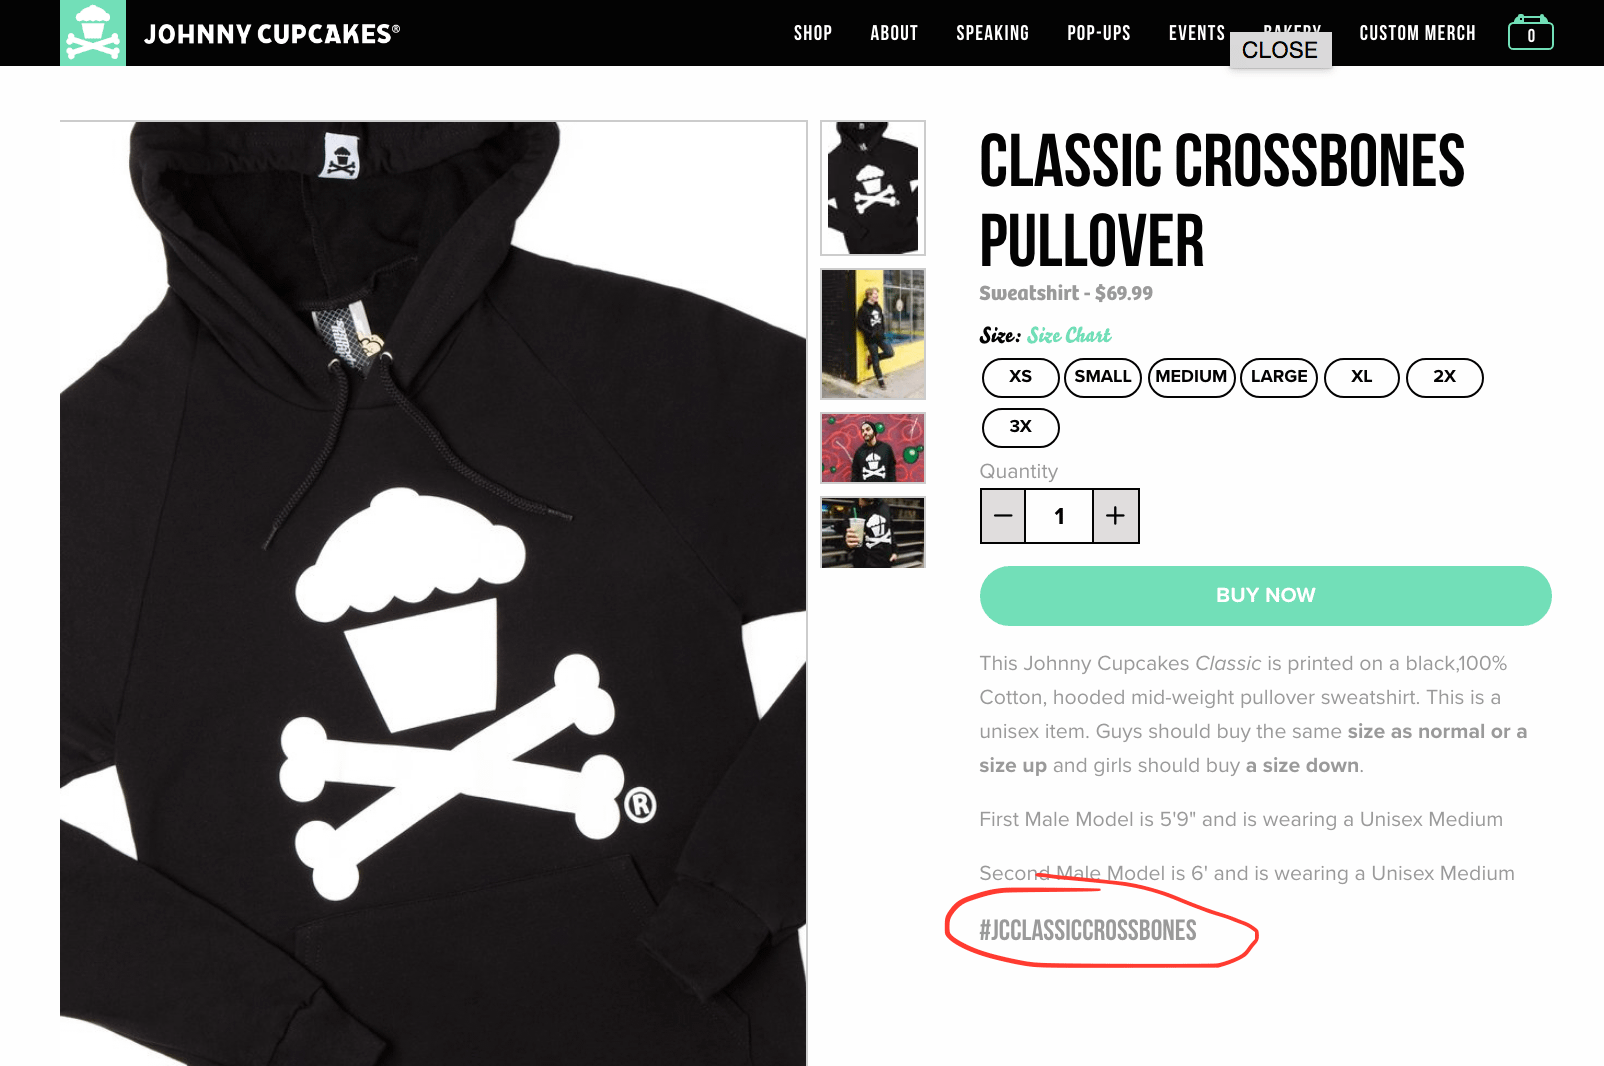 Johnny Cupcakes Item Detail Page